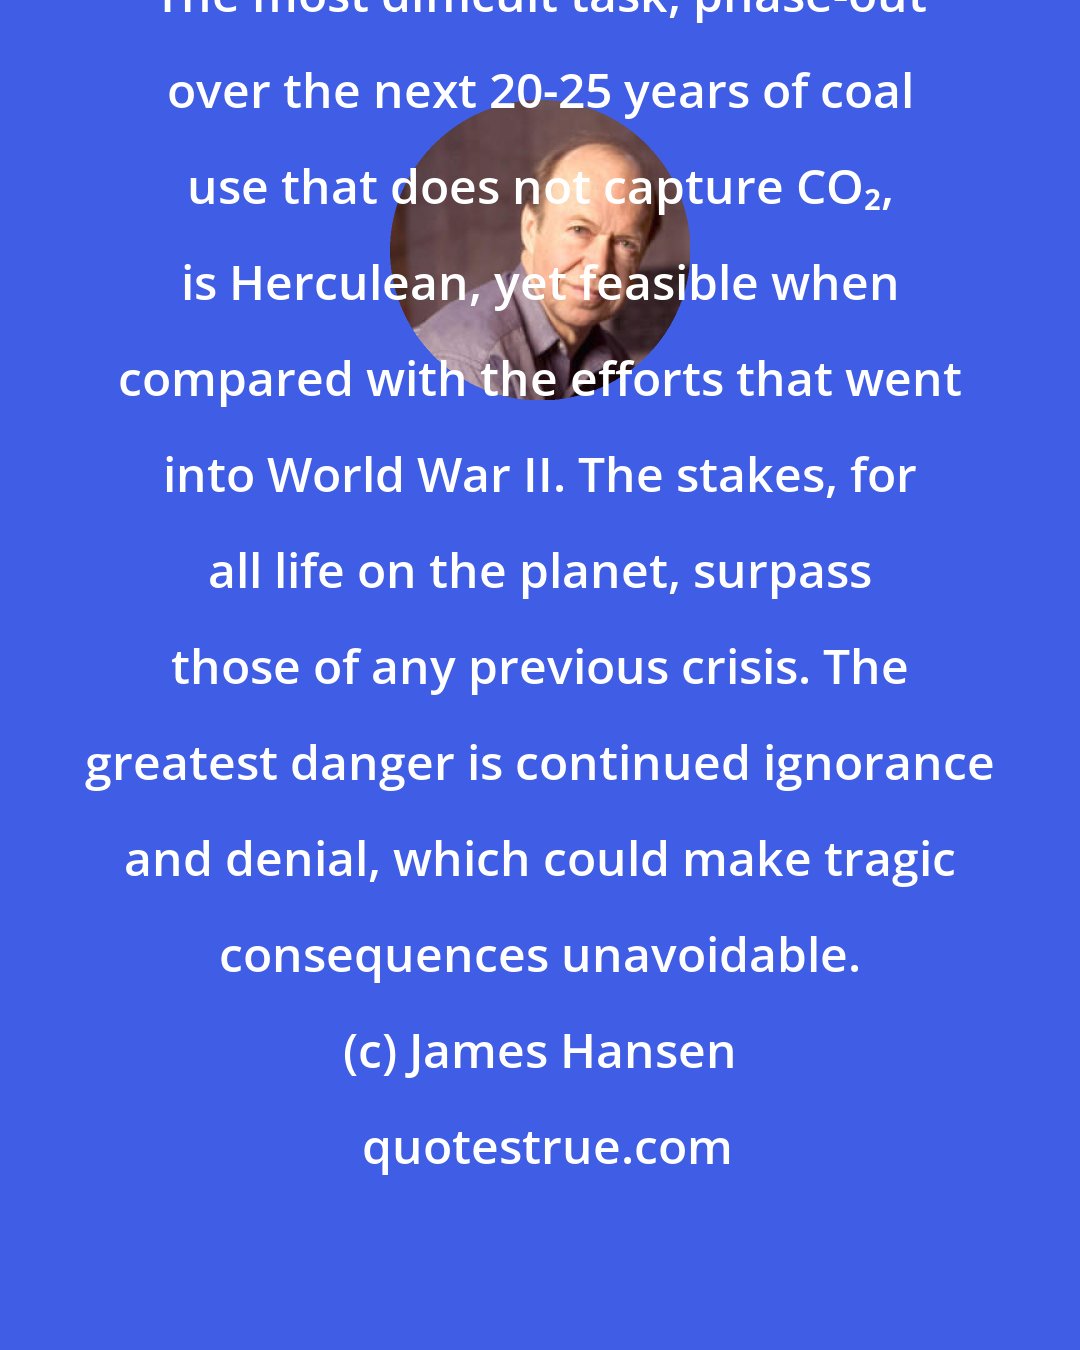 James Hansen: The most difficult task, phase-out over the next 20-25 years of coal use that does not capture CO₂, is Herculean, yet feasible when compared with the efforts that went into World War II. The stakes, for all life on the planet, surpass those of any previous crisis. The greatest danger is continued ignorance and denial, which could make tragic consequences unavoidable.